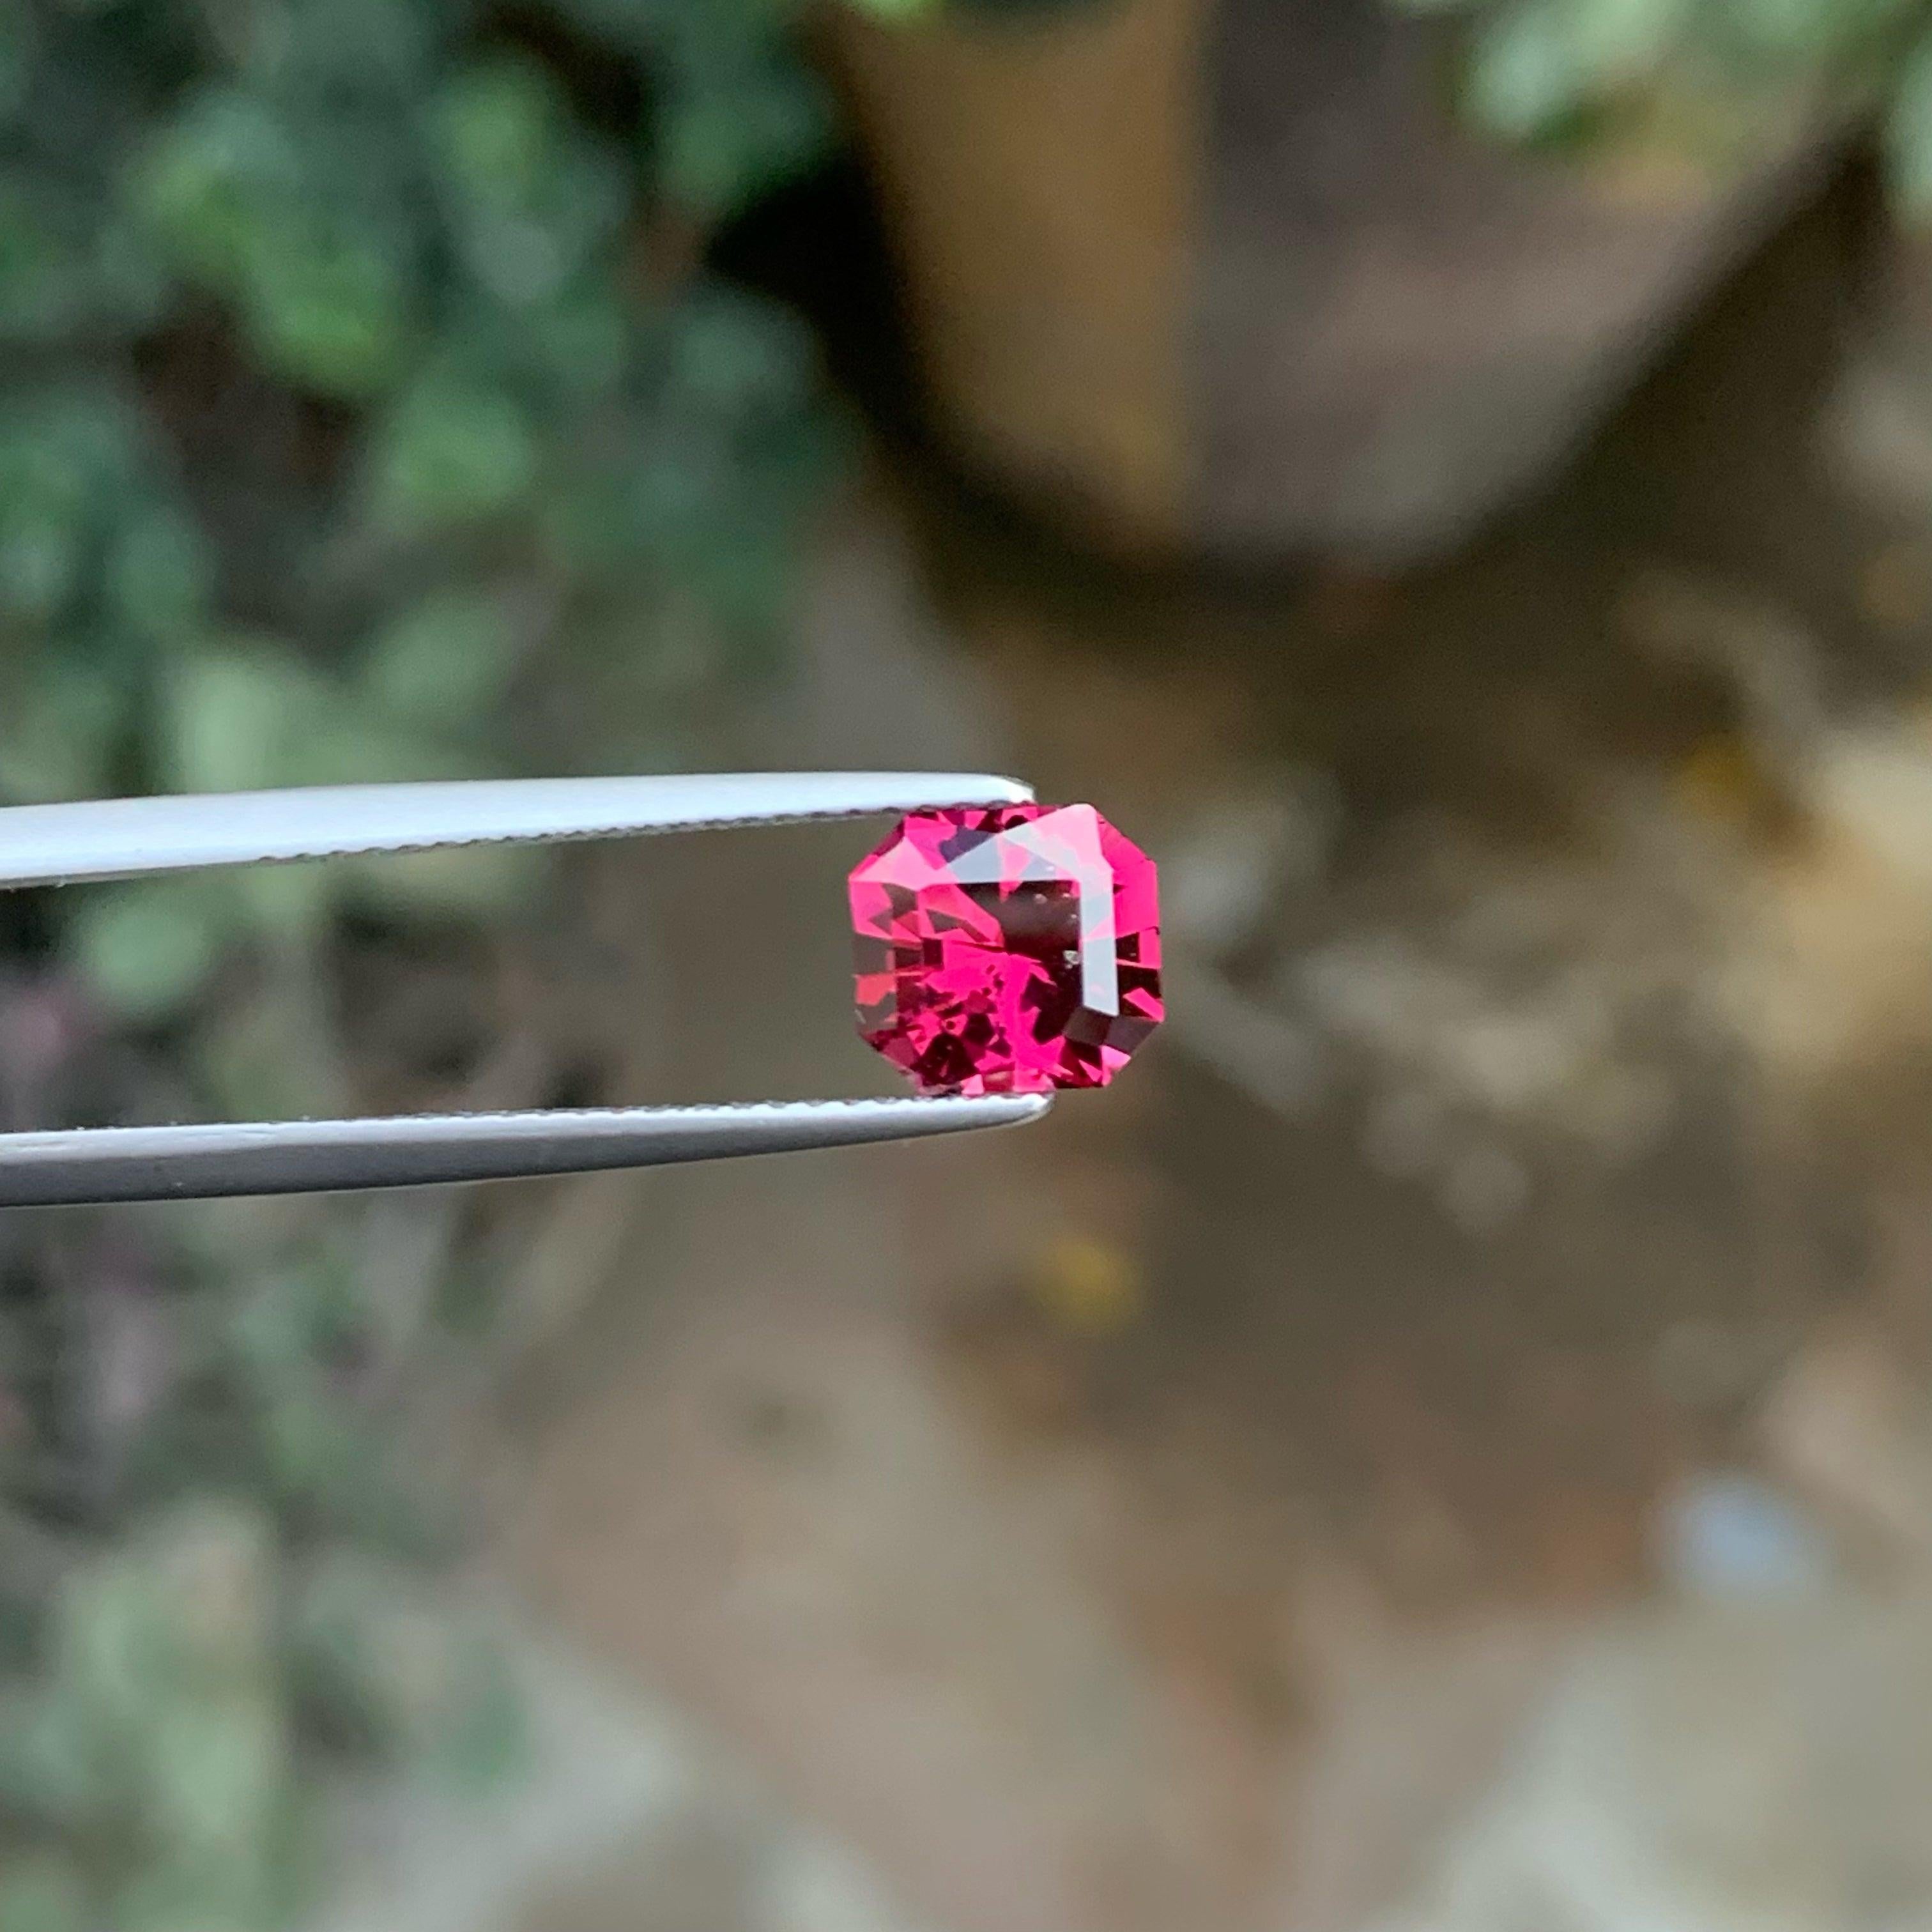 Bright Pinkish Red Garnet stone, Available for sale at whole sale price natural high quality 2.10 carats Vvs Clarity Loose Garnet from Malawi.

Product Information:
GEMSTONE NAME: Bright Pinkish Red Garnet stone
WEIGHT:	2.10 carats
DIMENSIONS:	 7.3